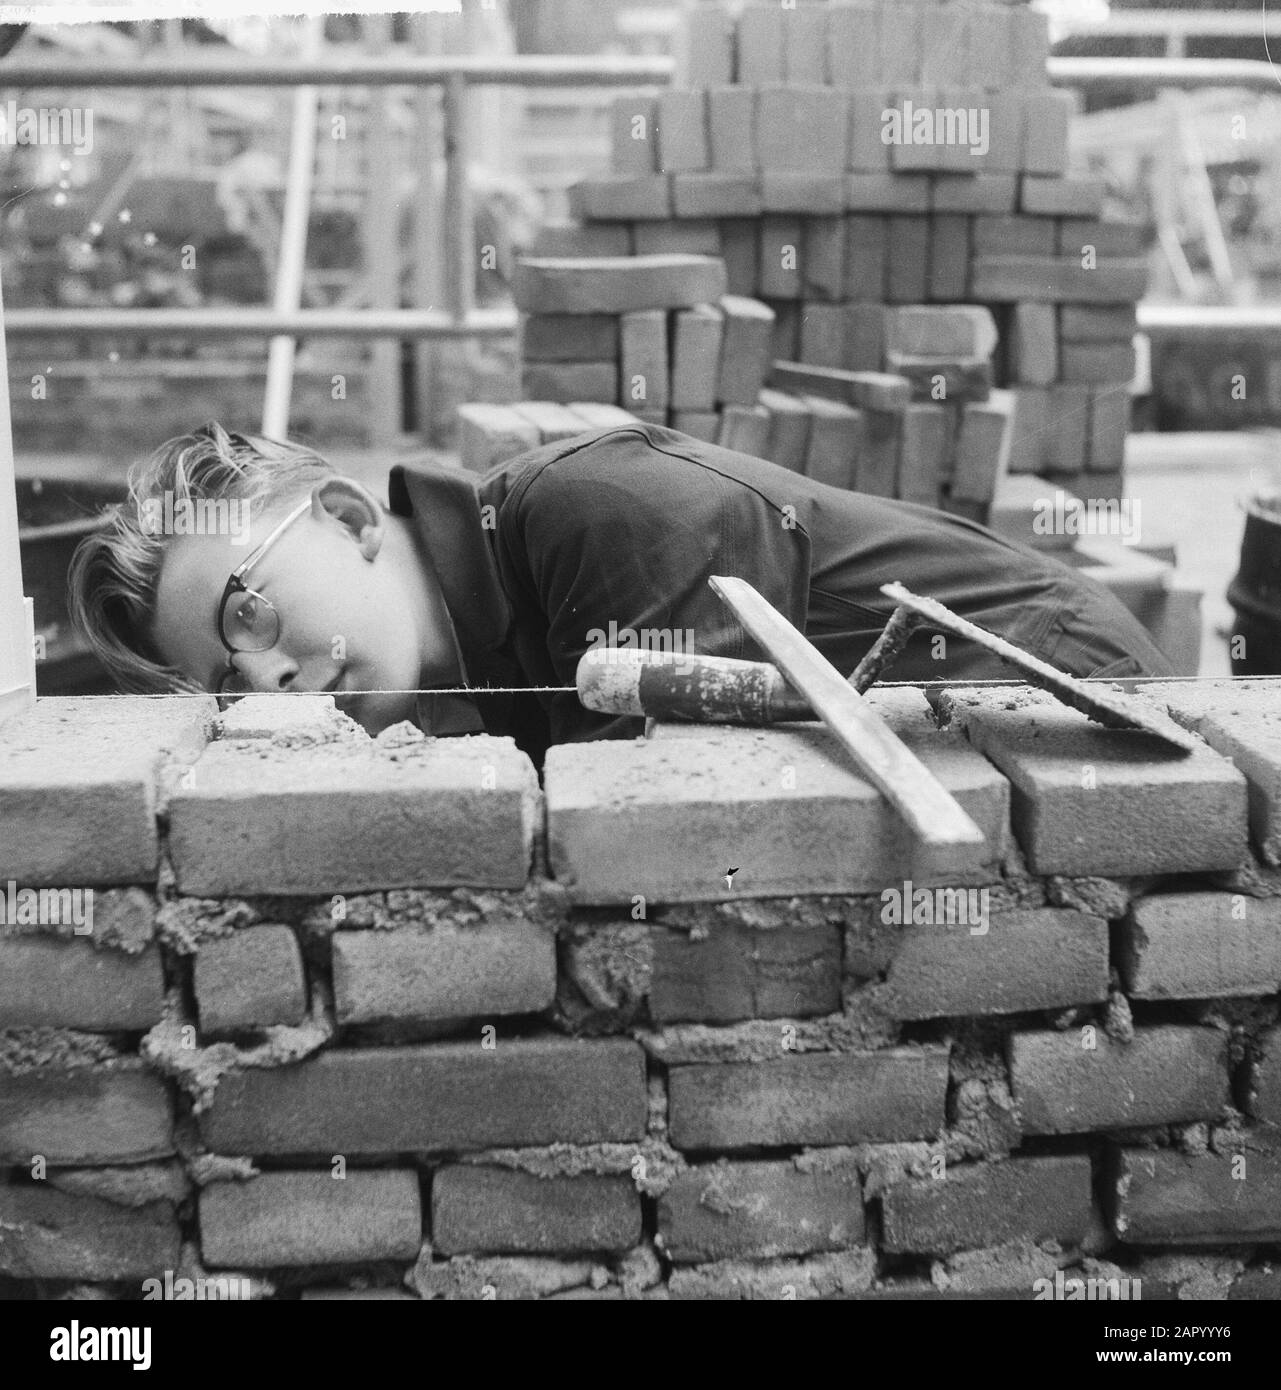 Masonry contest at the Ahoy Hall Date: July 3, 1961 Keywords: bricklaying Institution name: Ahoy Stock Photo